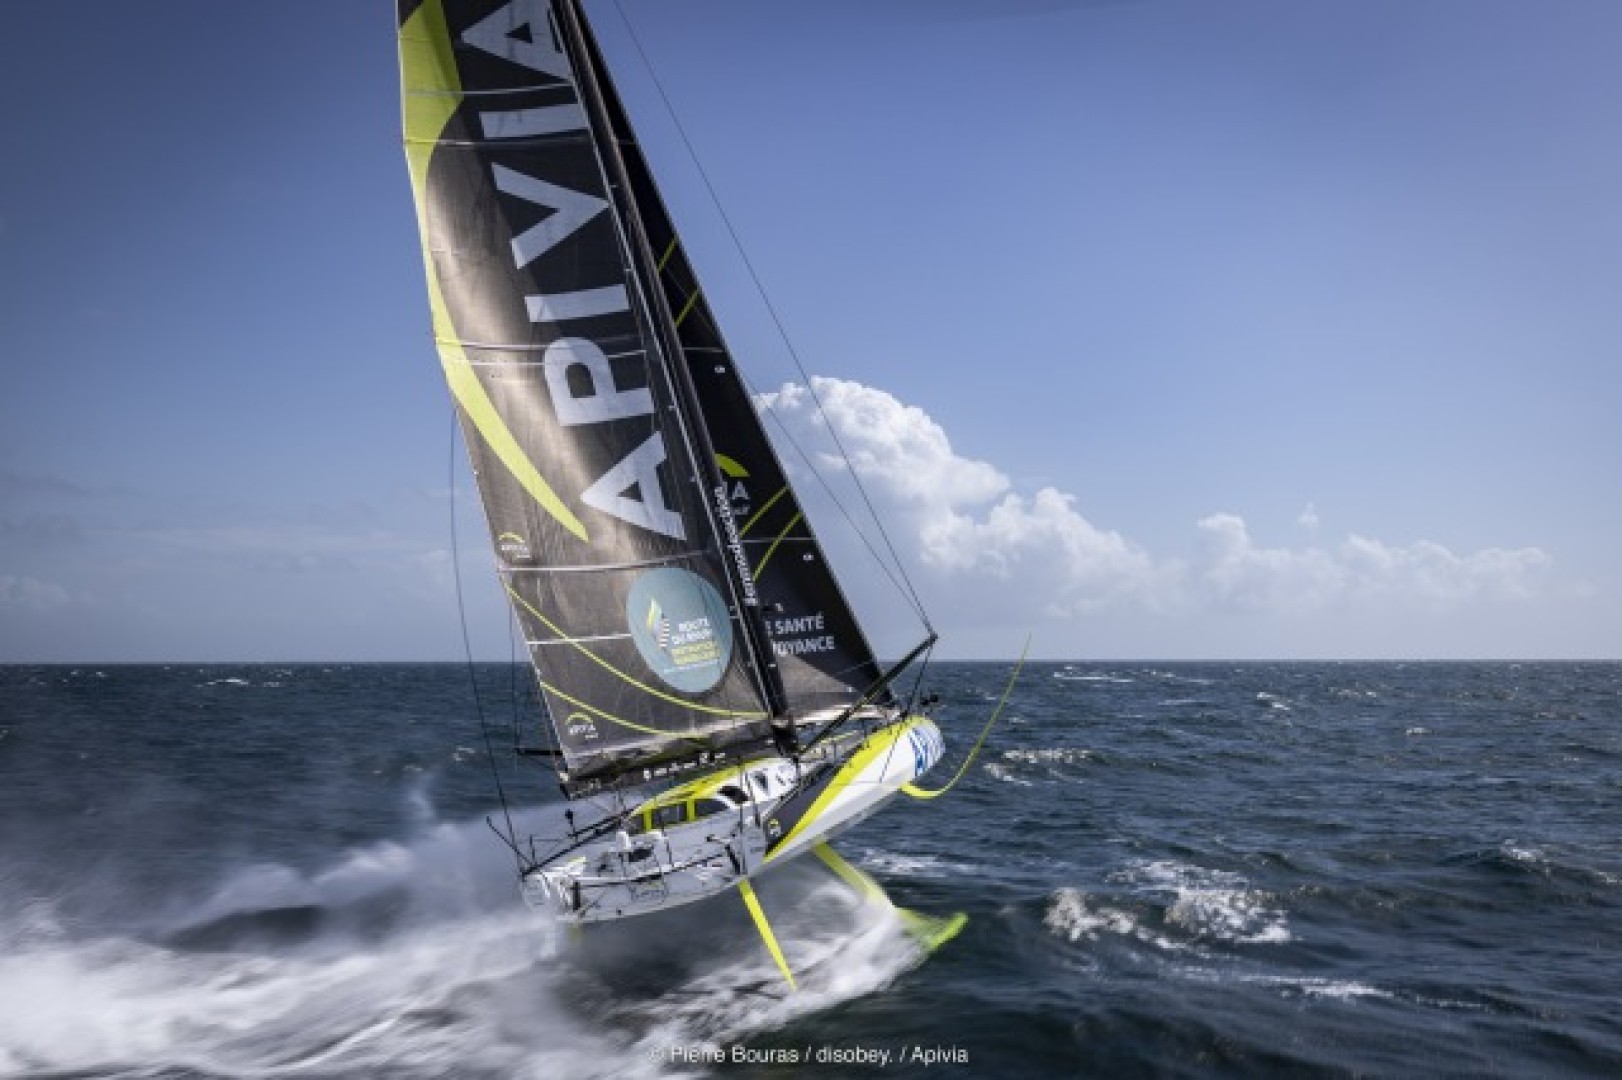 Dalin demonstrates Imoca superiority, Caudrelier has fight on his hands